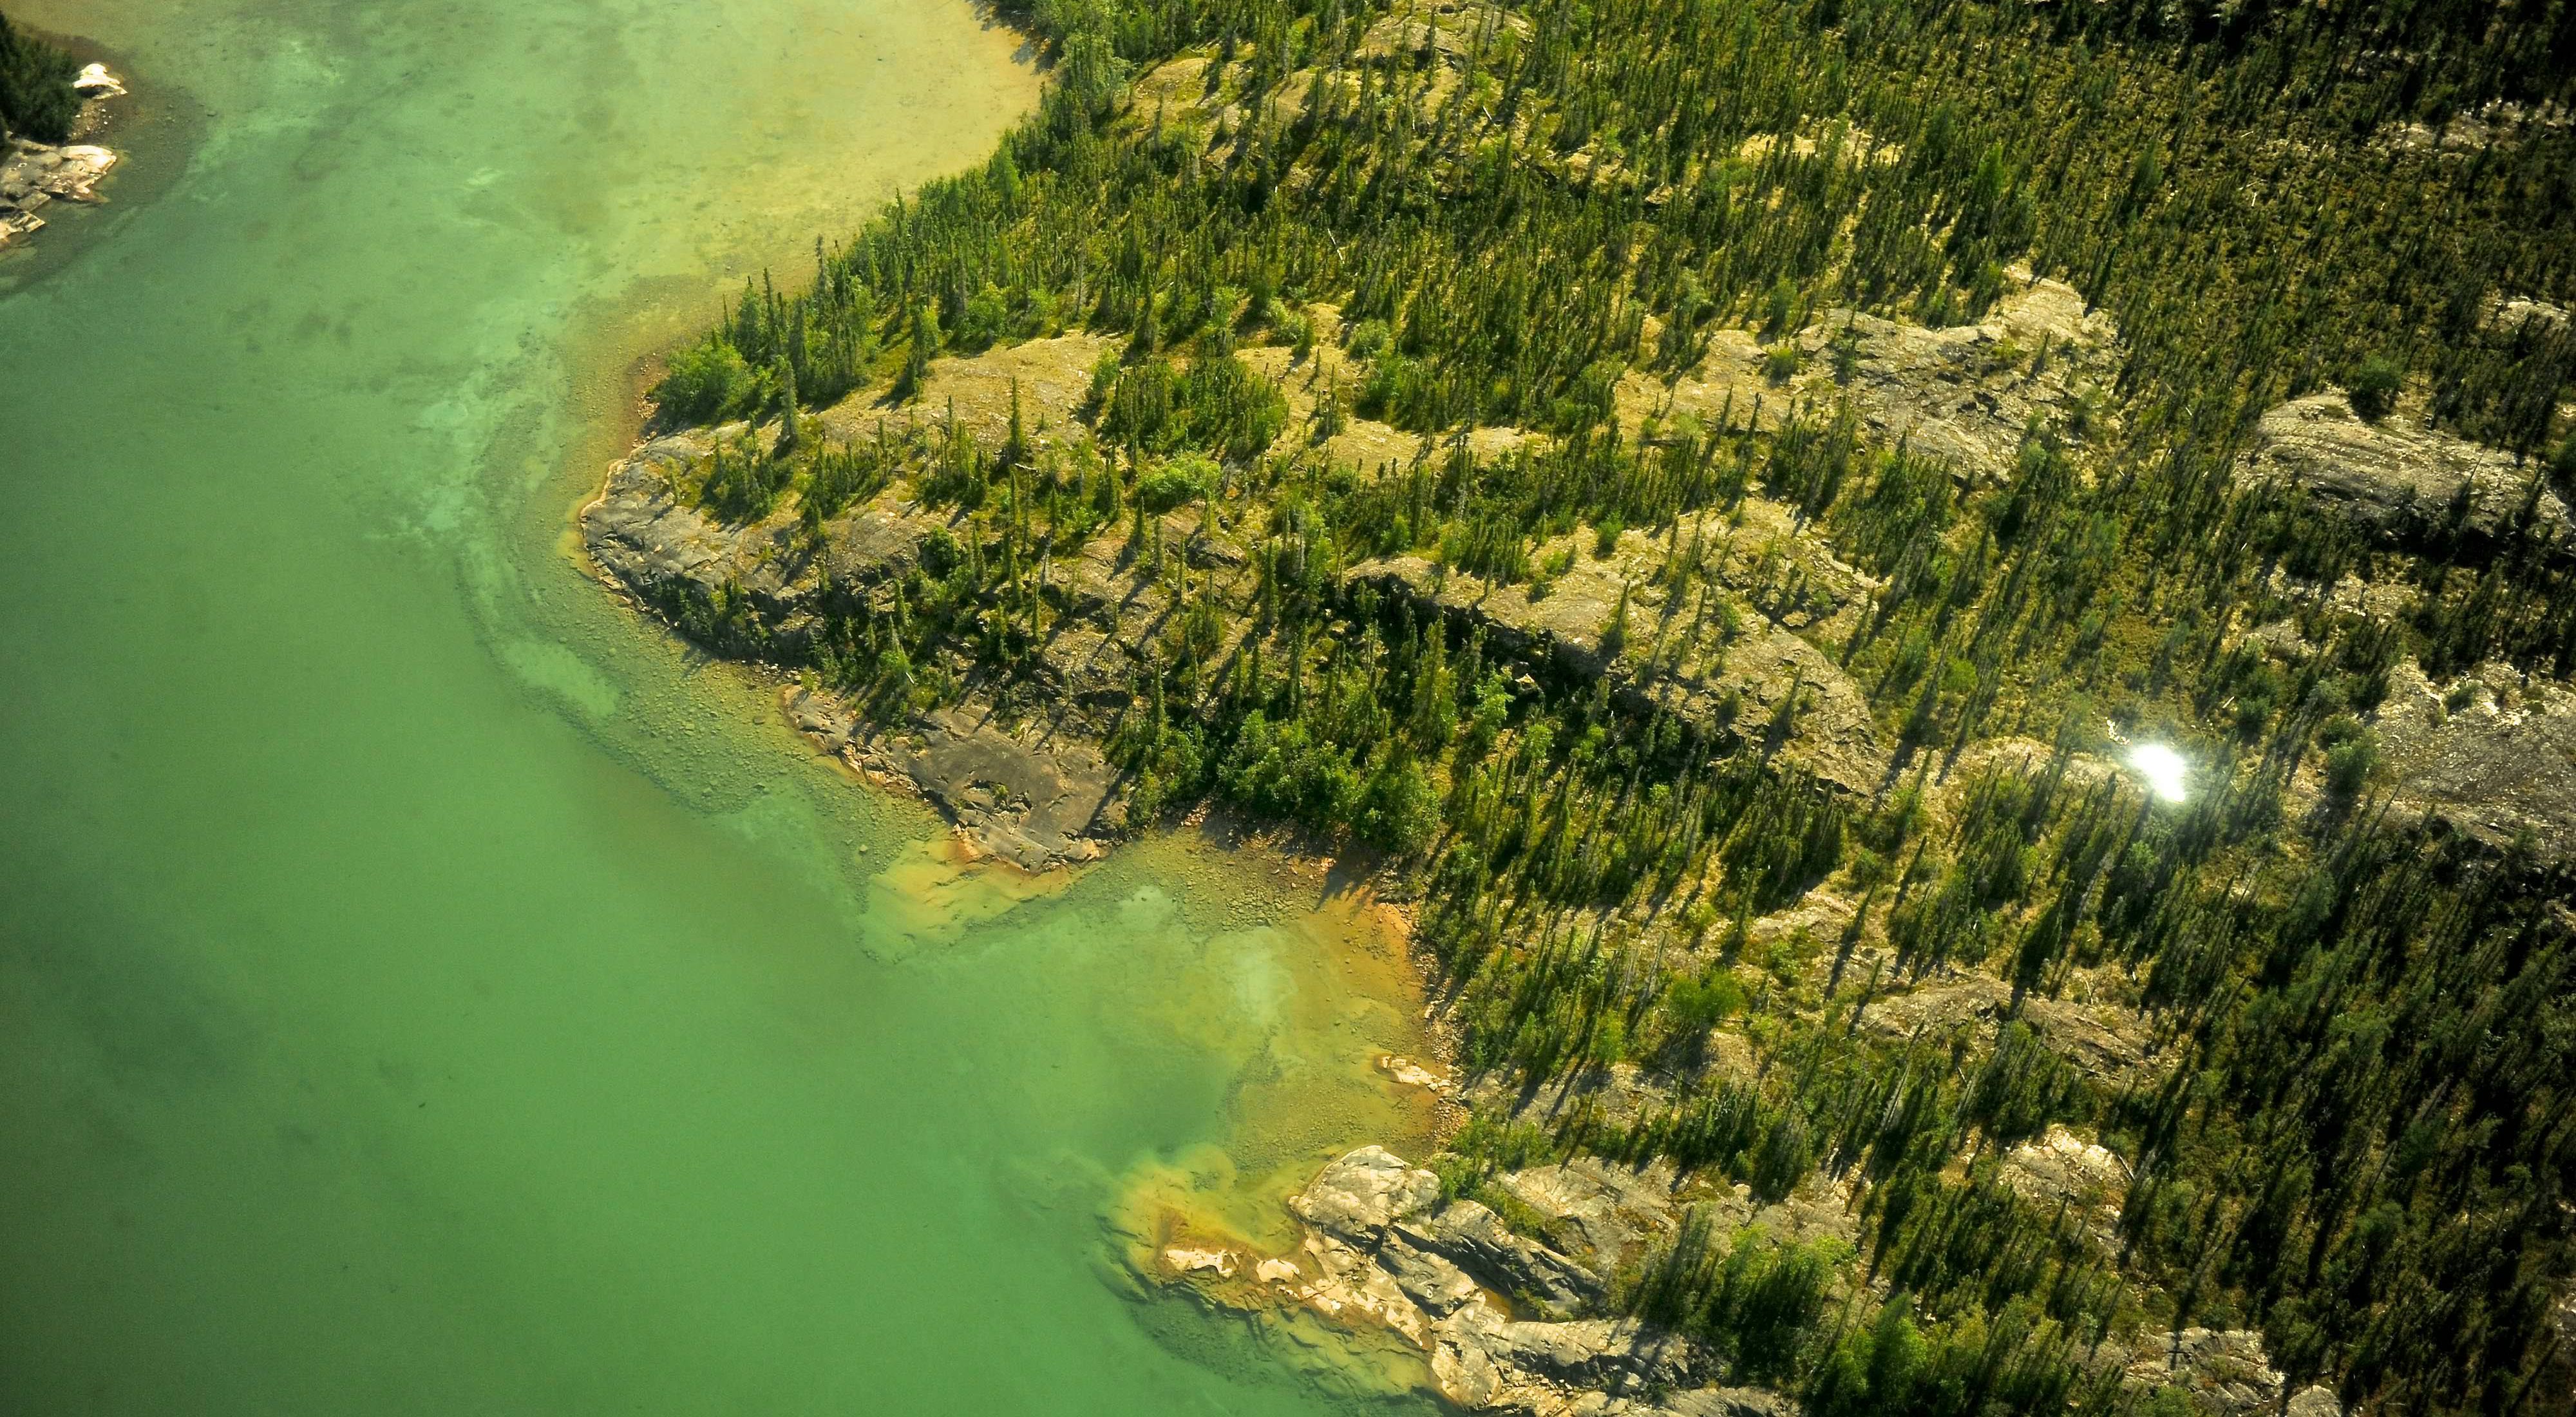 For the Akaitcho Dene people, the Upper Thelon River is "the place where God began."